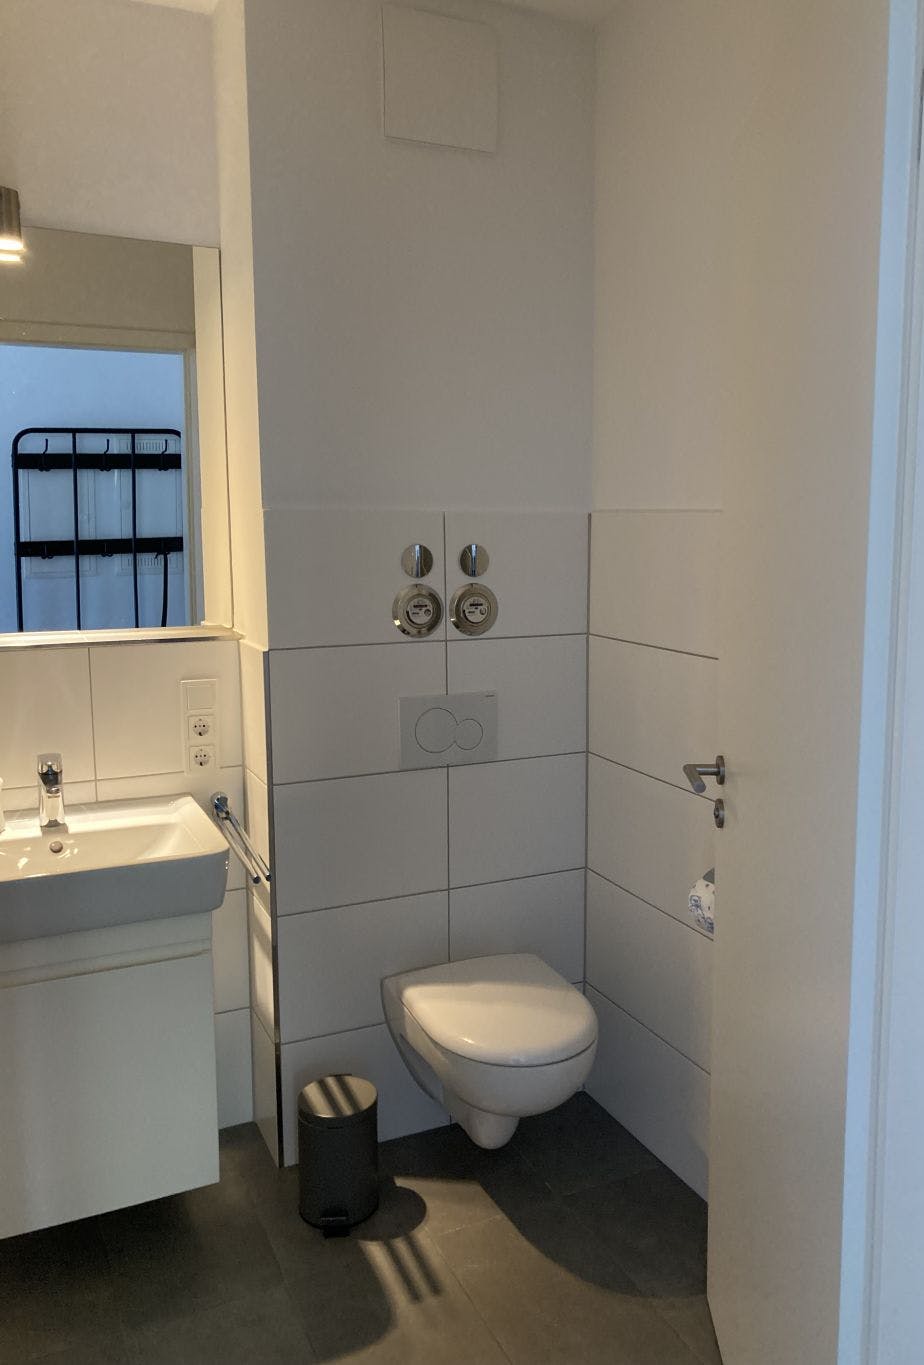 2 room-modern 2020s apartment in in Cologne-Lövenich (West) close to S-Bahn station